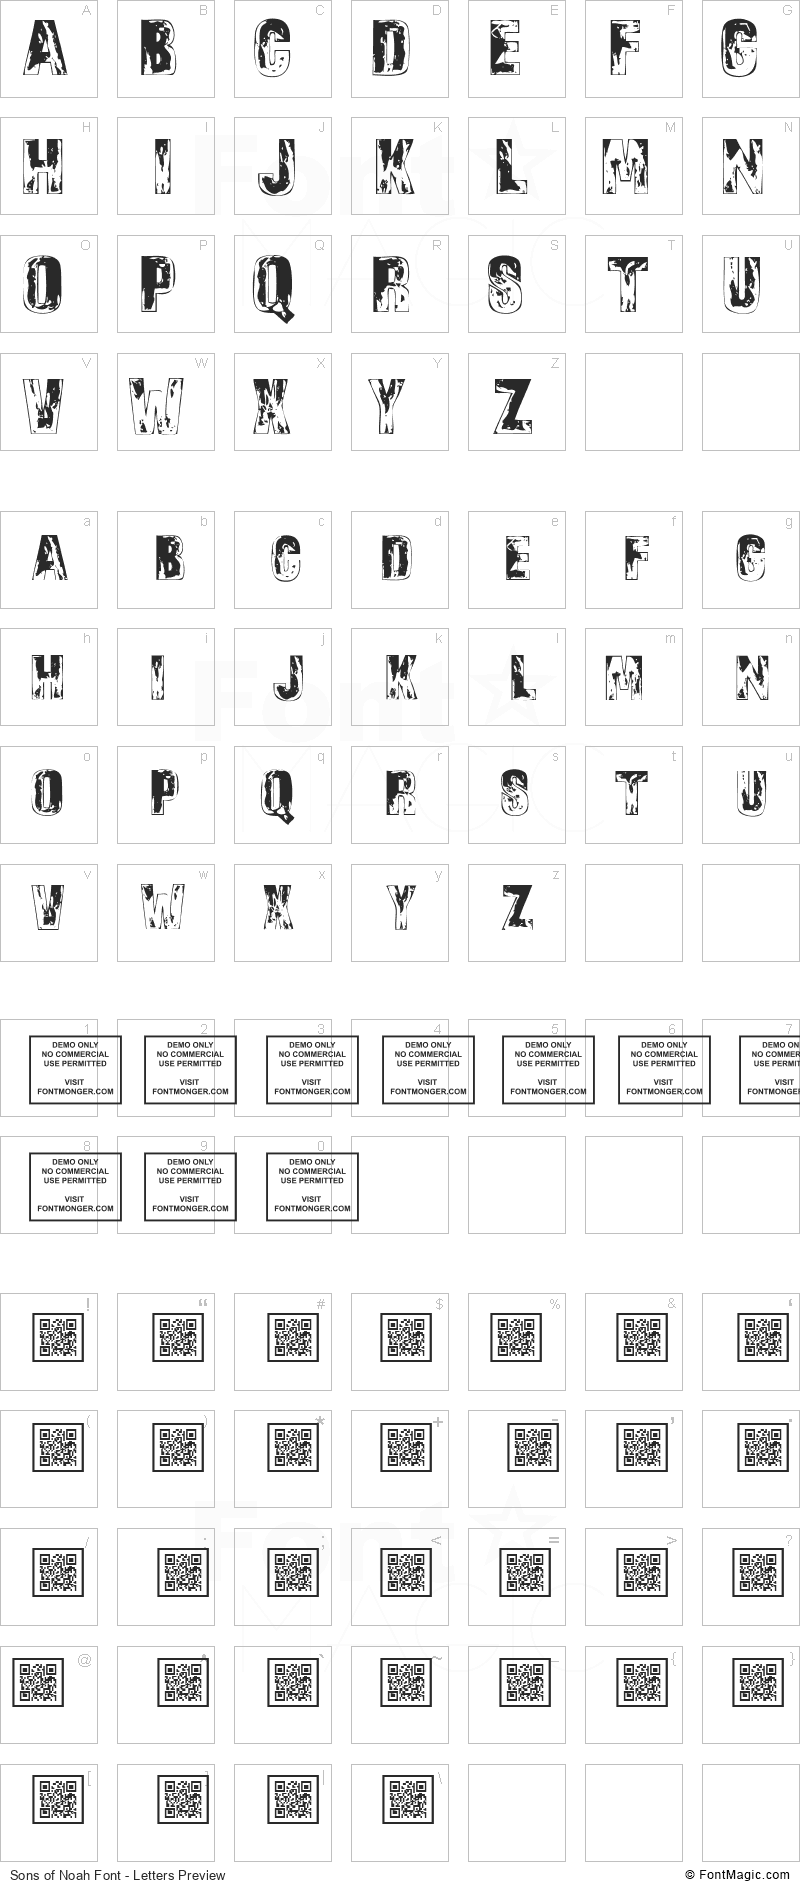 Sons of Noah Font - All Latters Preview Chart